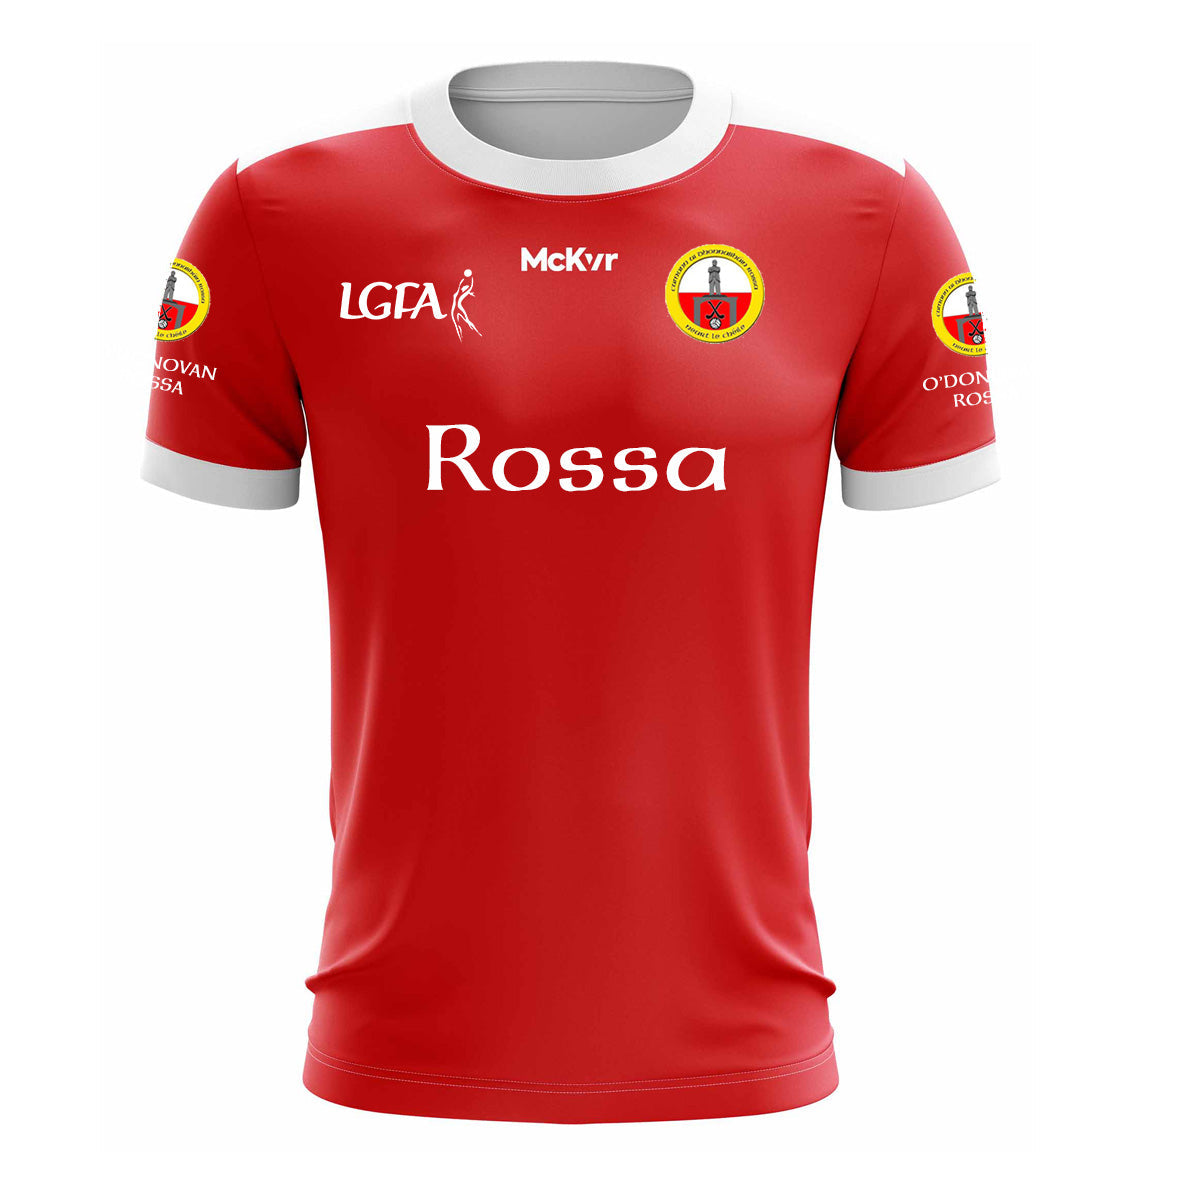 Mc Keever O'Donovan Rossa LGFA Playing Jersey - Youth - Red/White